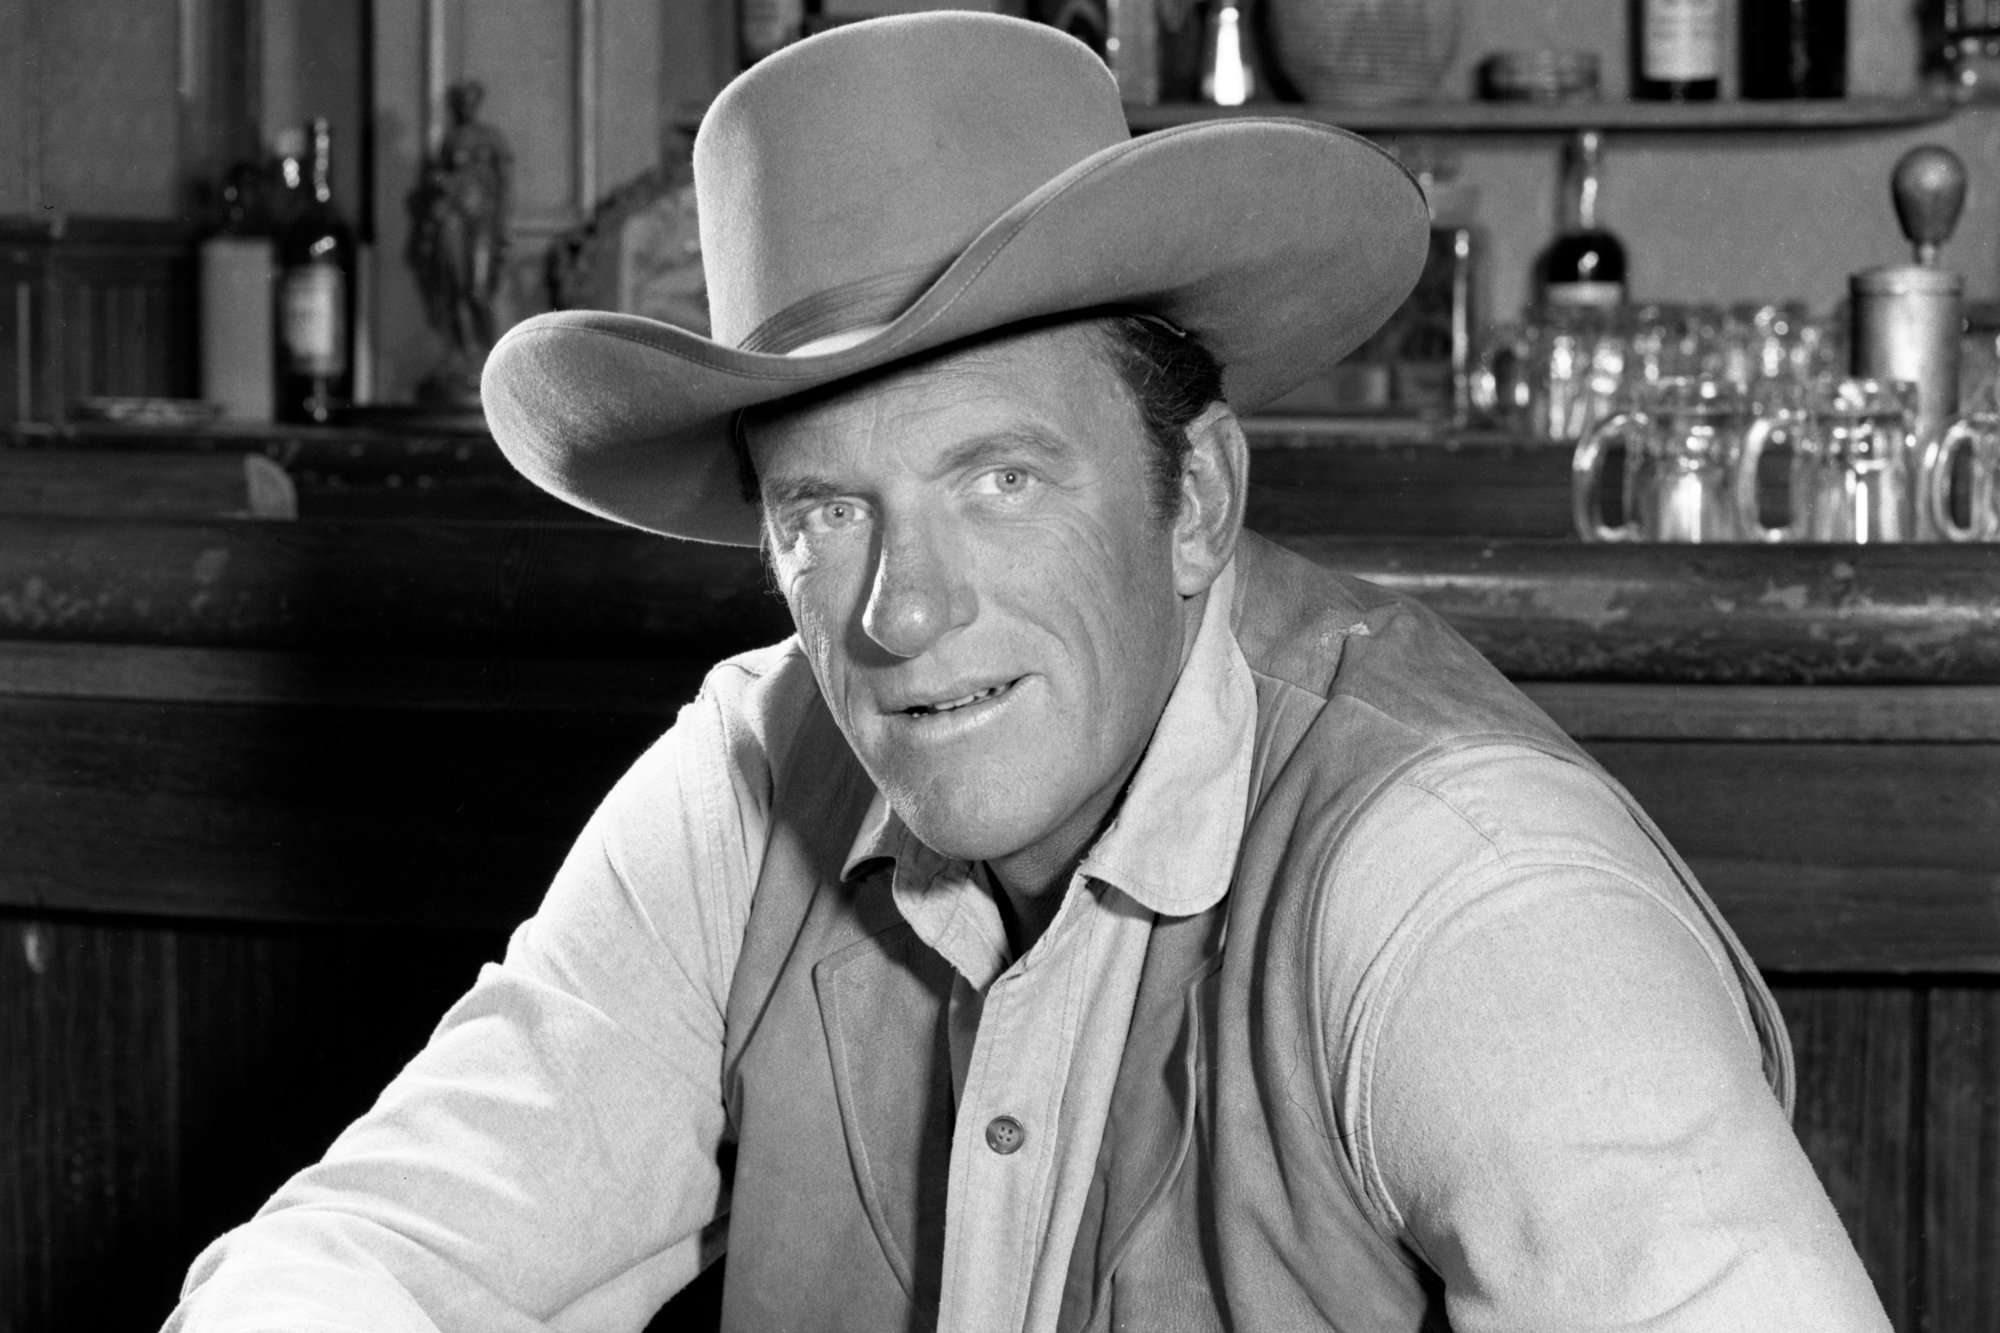 'Gunsmoke' James Arness as U.S. Marshal Matt Dillon in a black-and-white portrait in front of a wooden tabletop